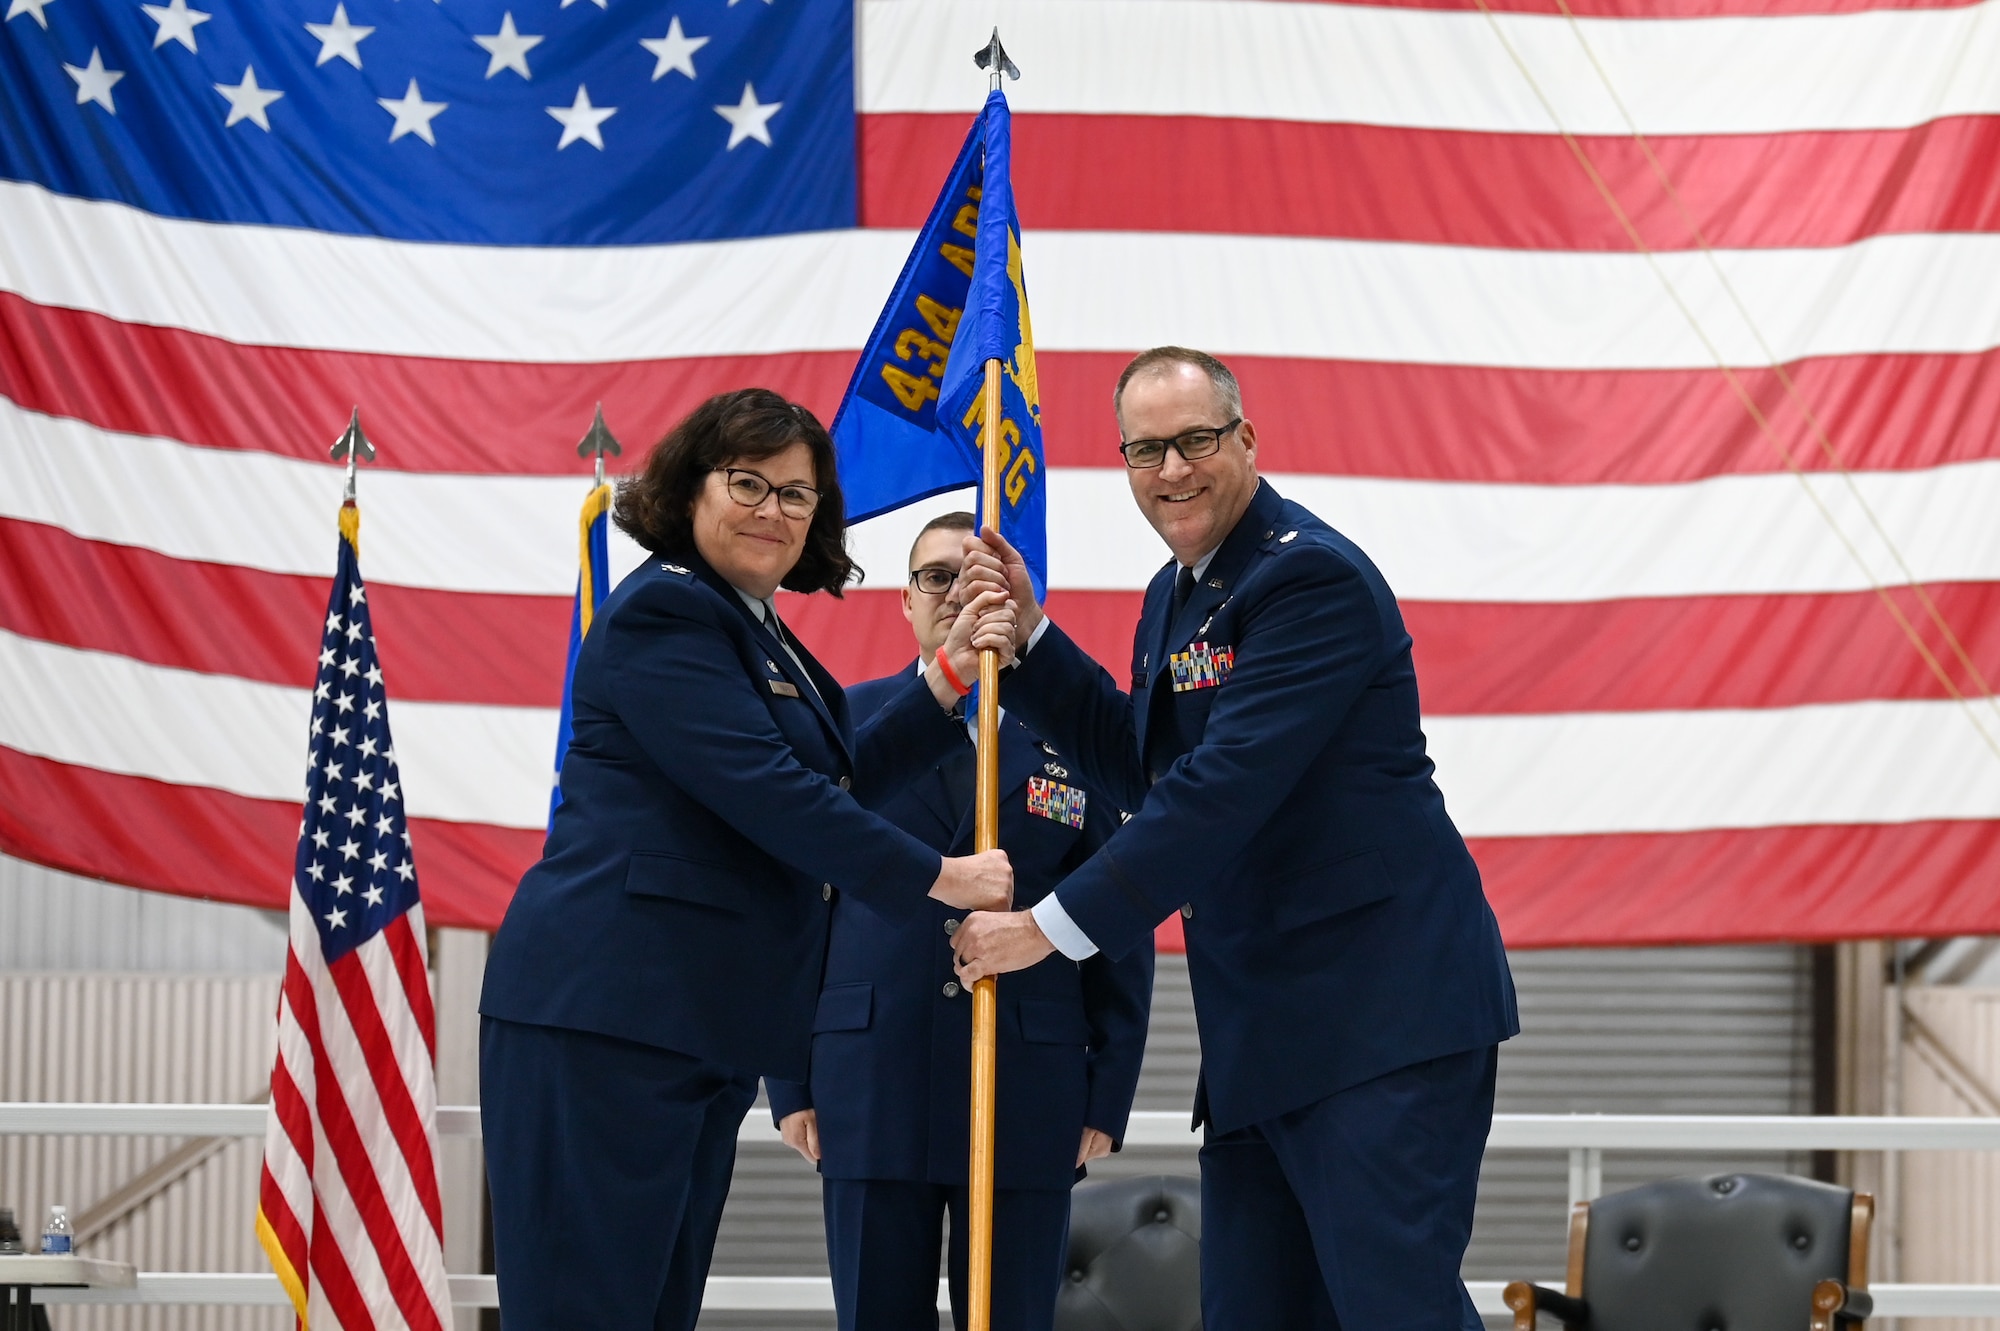 Lt. Col. David Borden, 434th Mission Support Group commander, accepts the guidon from Col. Summer Fields, 434th Air Refueling Wing commander, during a change of command ceremony. Both are standing on a stage, facing each other, with a large American flag behind them.